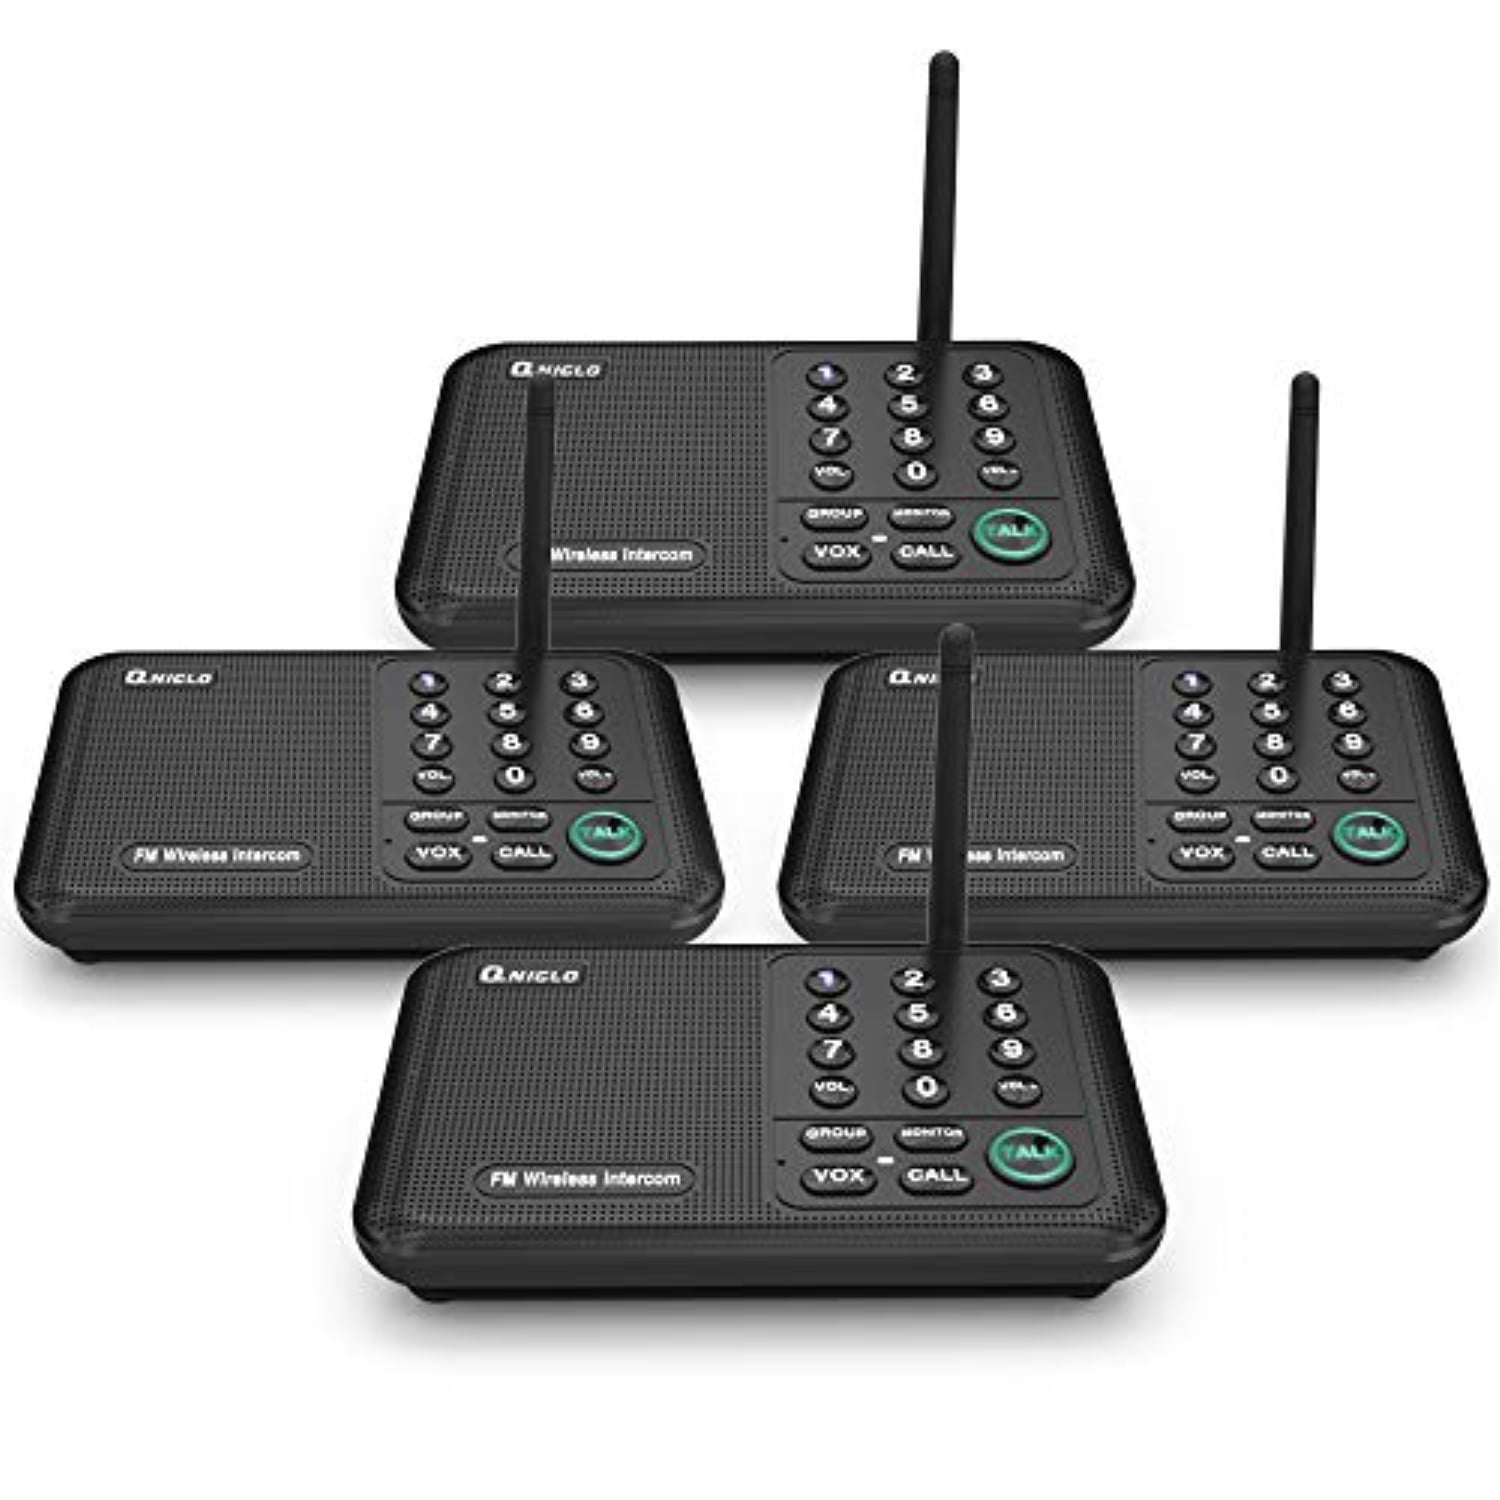 ingenieur kleur Uitstroom qniglo wireless intercom system, 1/2 mile long range fm 10 channel business  intercoms system for home and office (4 stations, black) - Walmart.com